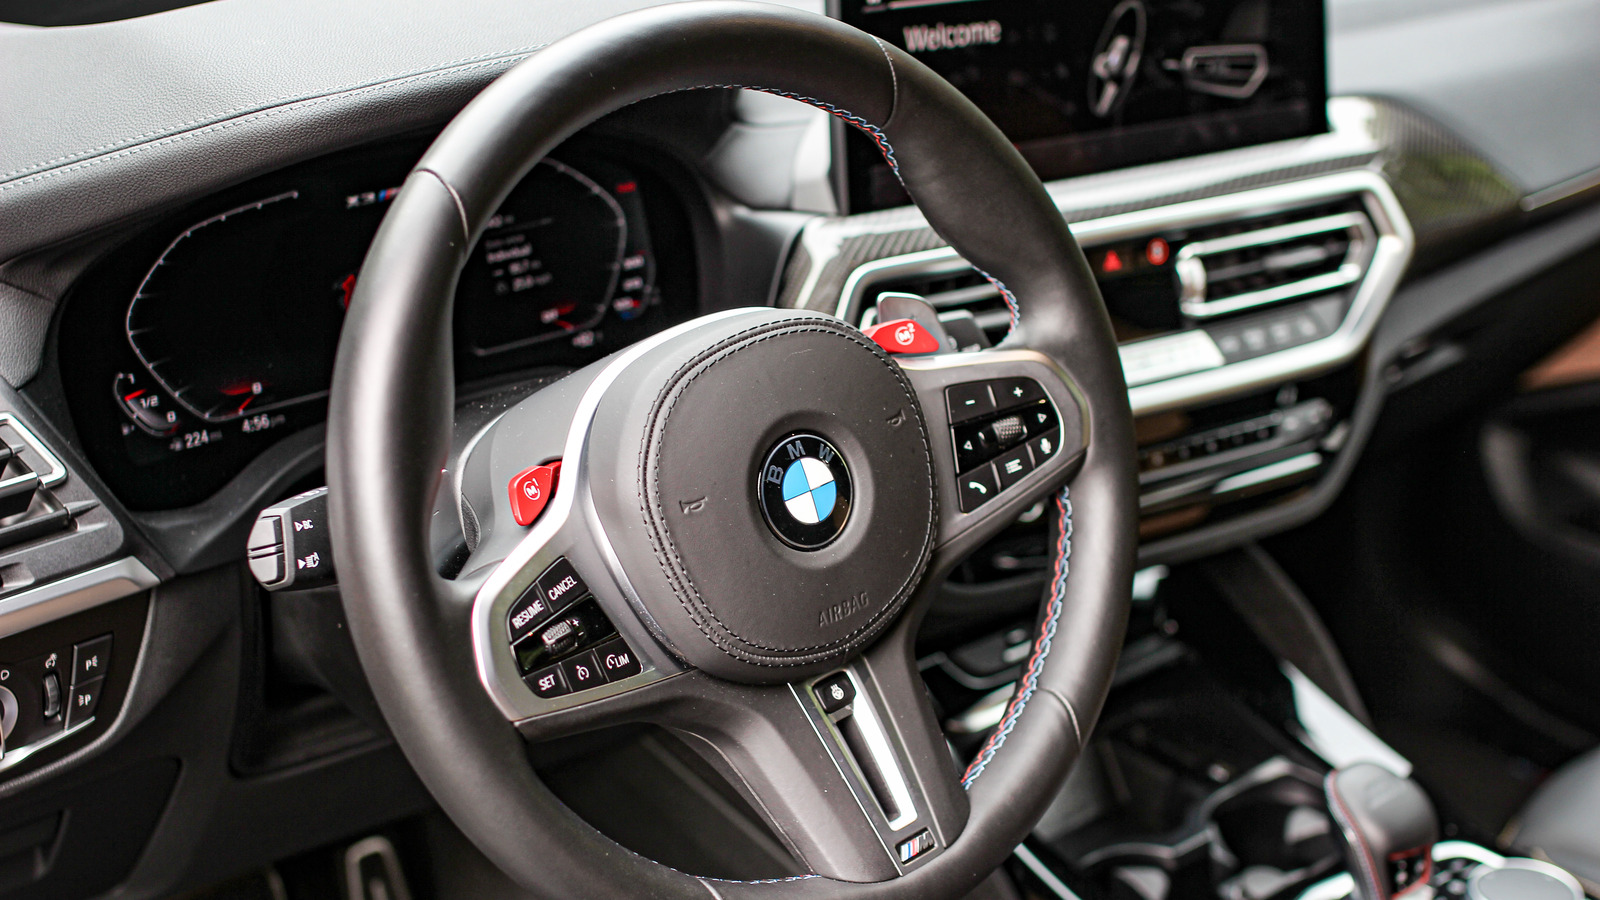 bmw-s-infotainment-gestures-awkwardly-at-distracted-driving-test-drive-field-notes-slashgear